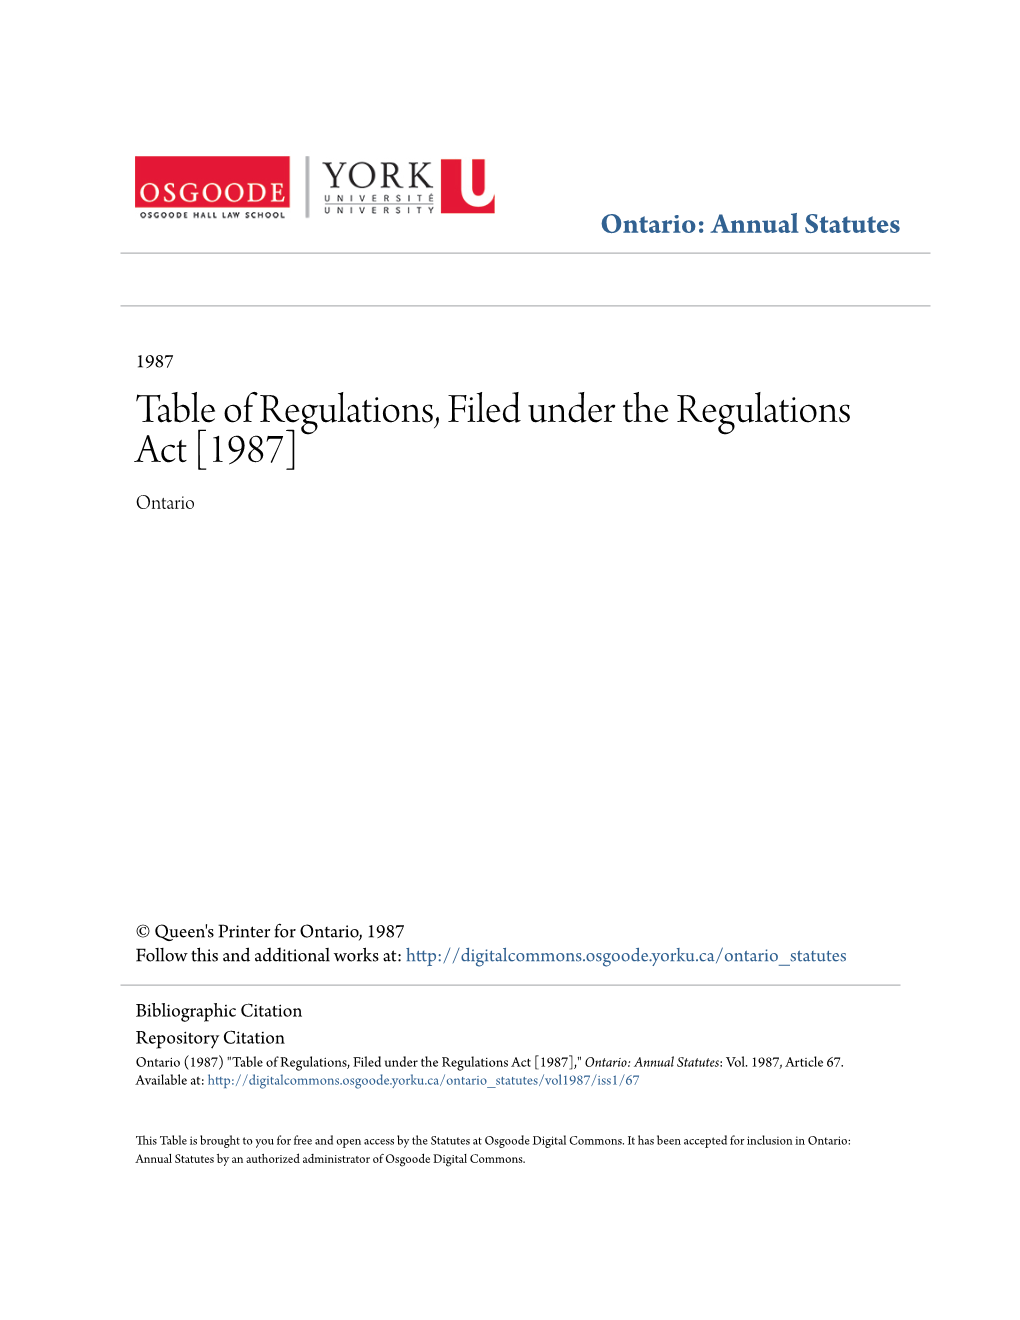 Table of Regulations, Filed Under the Regulations Act [1987] Ontario